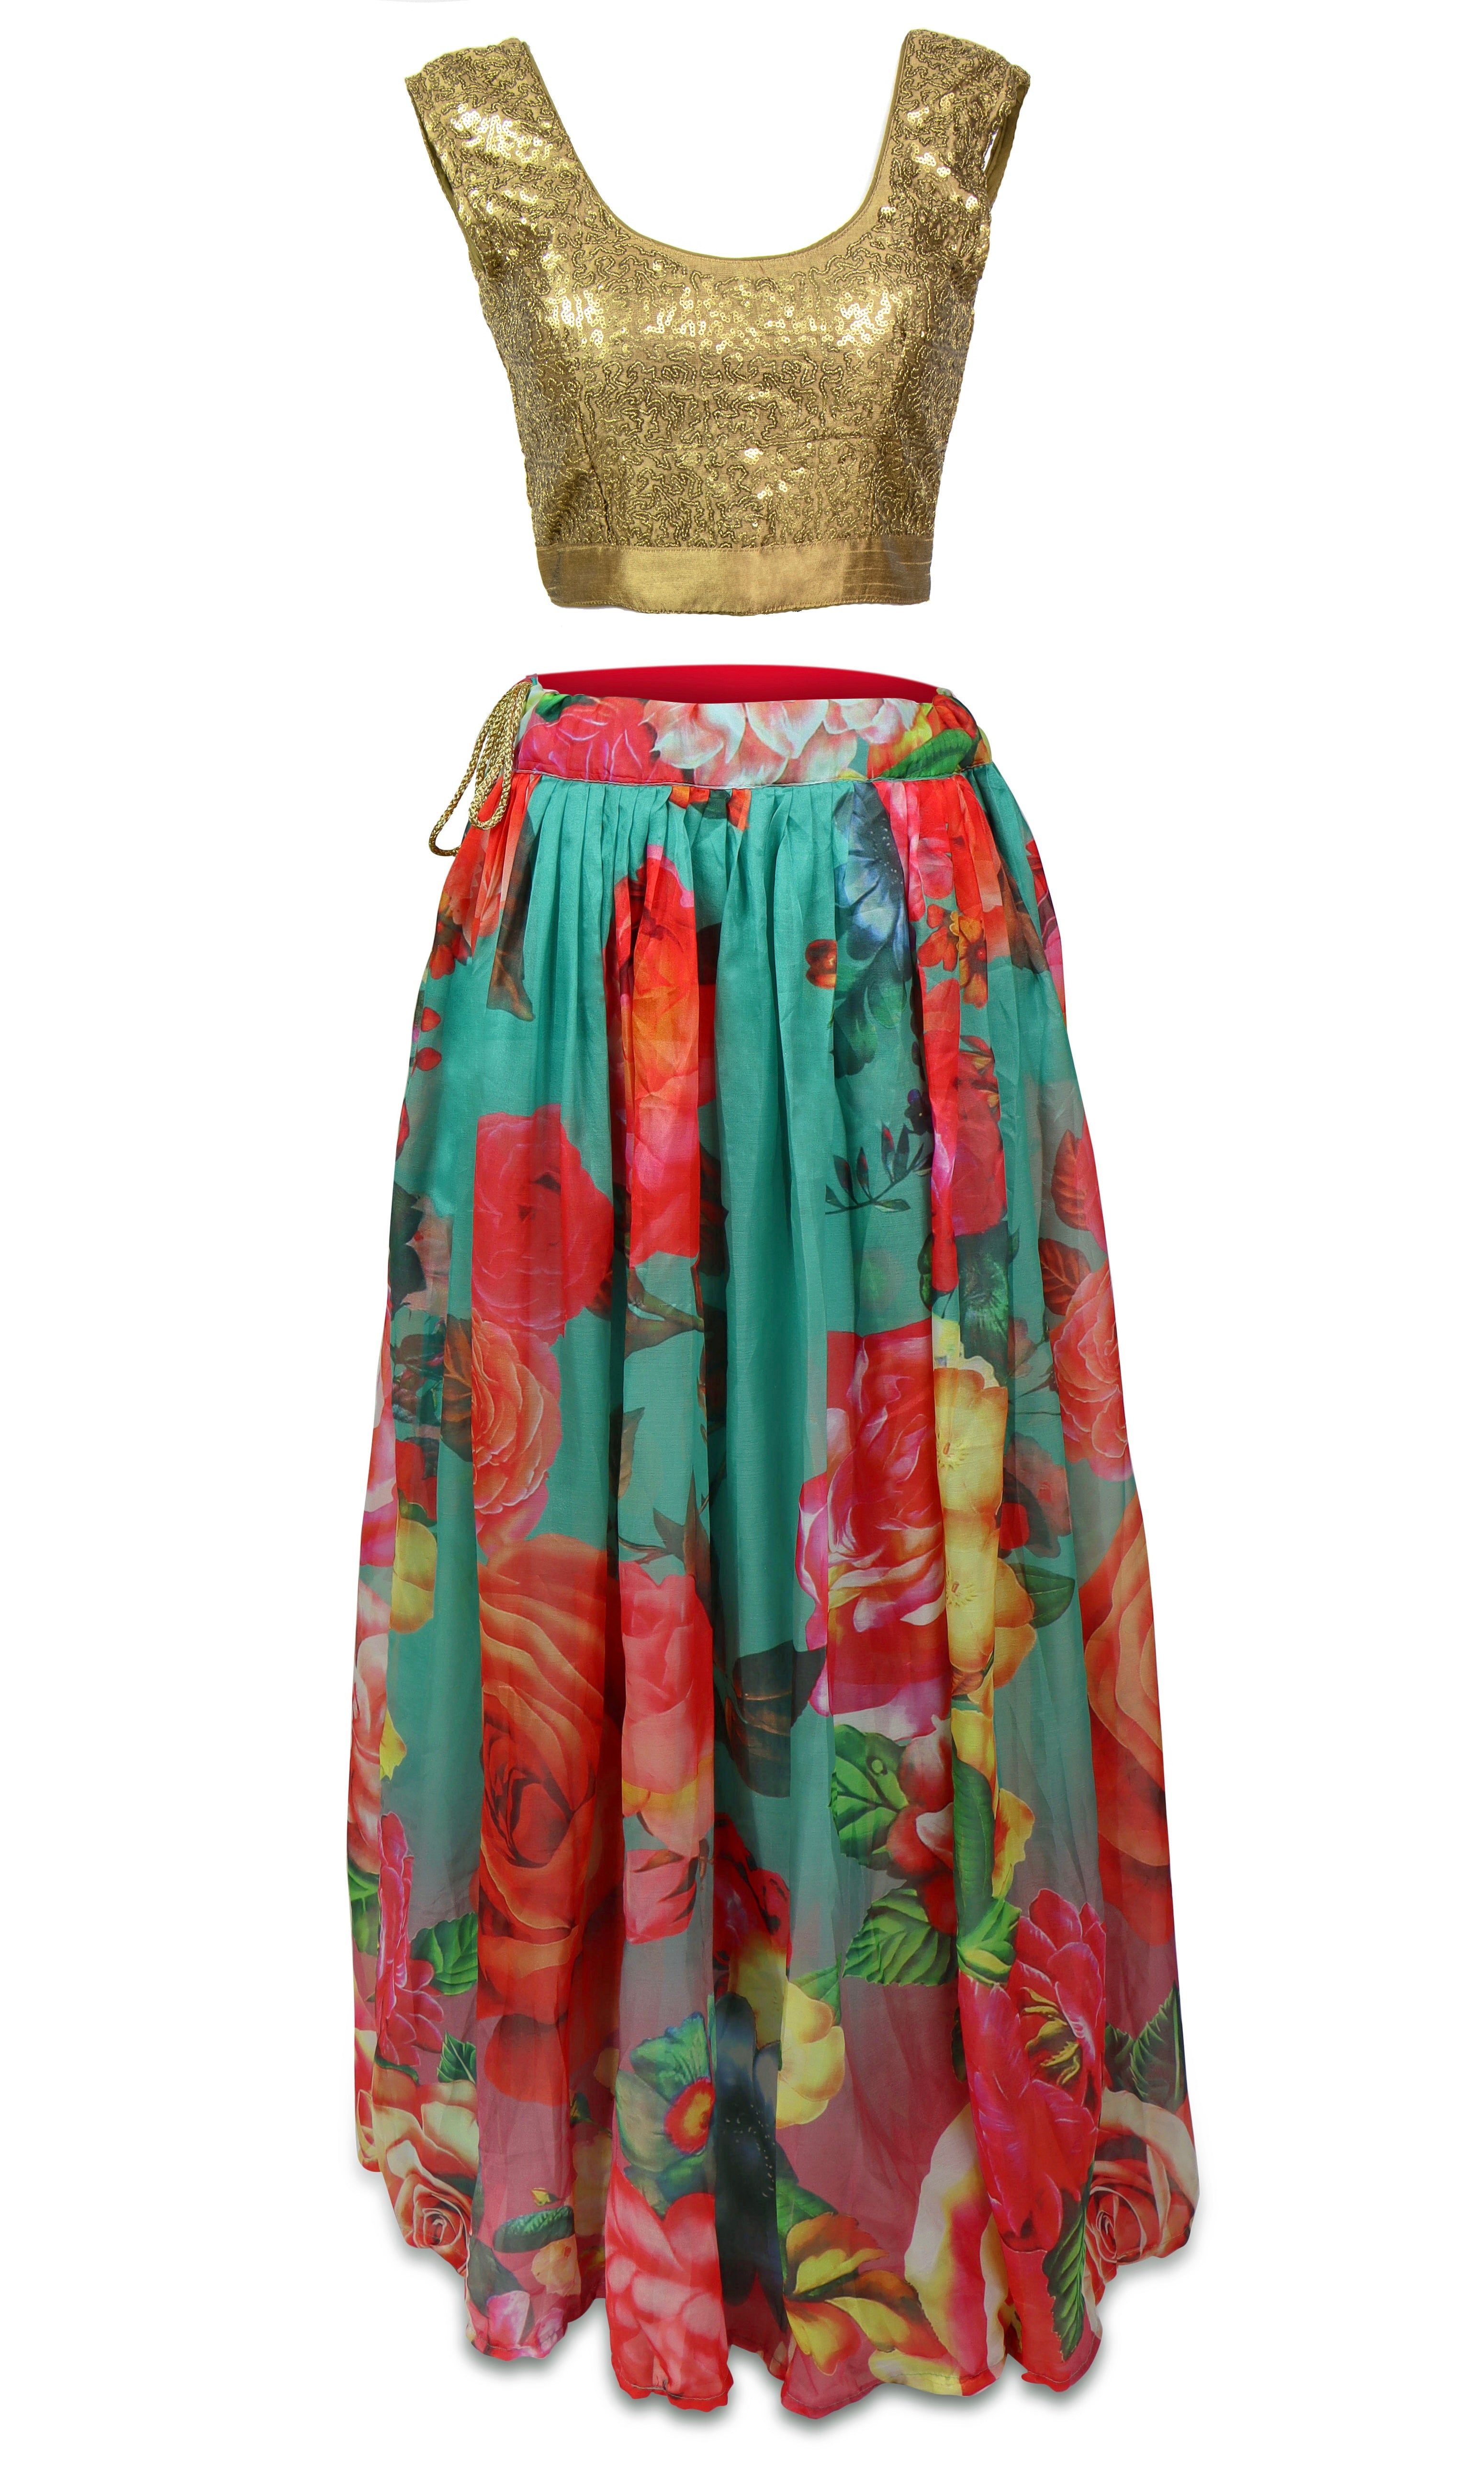  Floral lehenga with light & flowy. There are two options for a blouse: a plain hot pink or a gold sequined one.